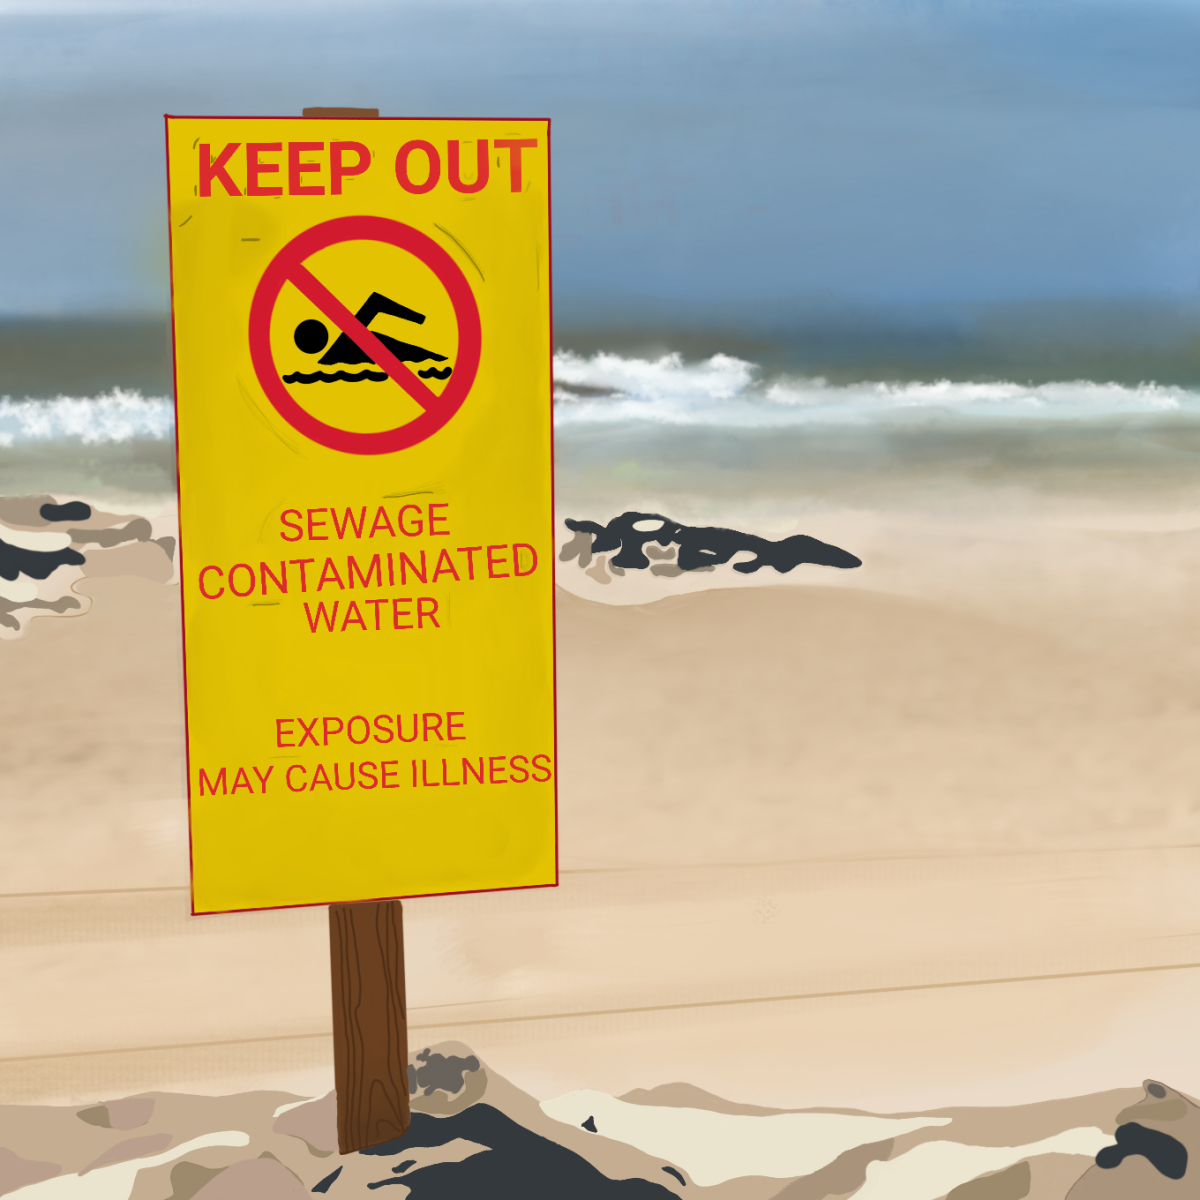 Warning+signs+are+prominently+becoming+displayed+at+beaches+that+have+been+contaminated.+As+sewage+water+escapes+to+the+ocean%2C+people+must+be+aware+of+the+effects+it+can+have+if+they+were+to+enter+the+waters.